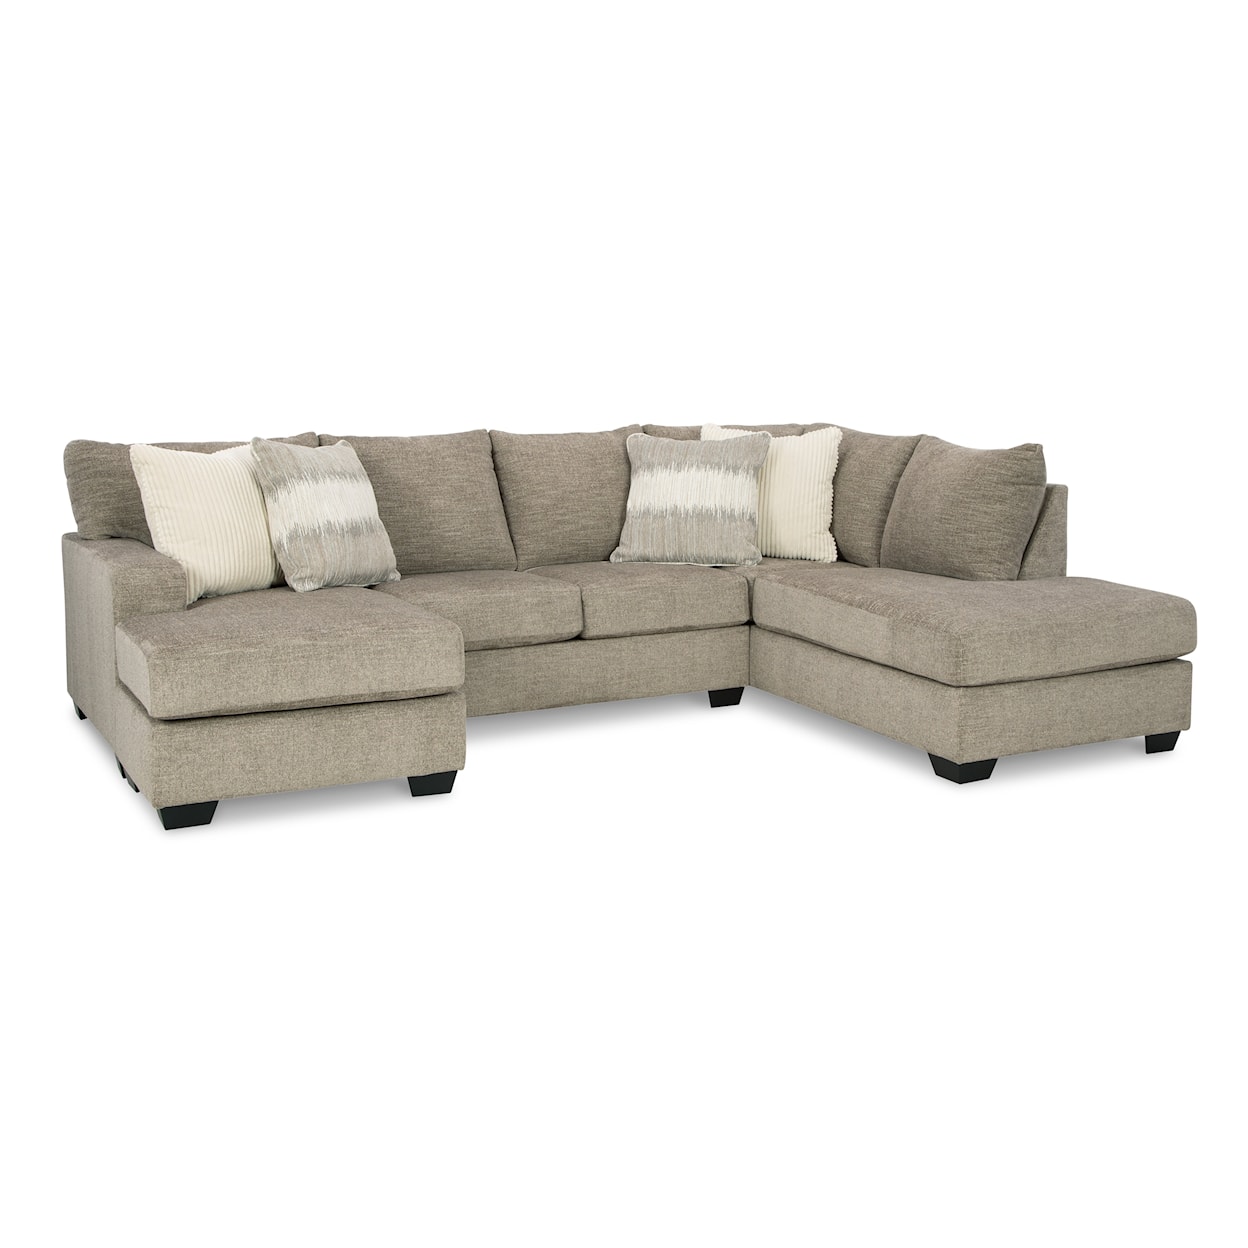 Signature Design by Ashley Furniture Creswell 2-Piece Sectional with 2 Chaises